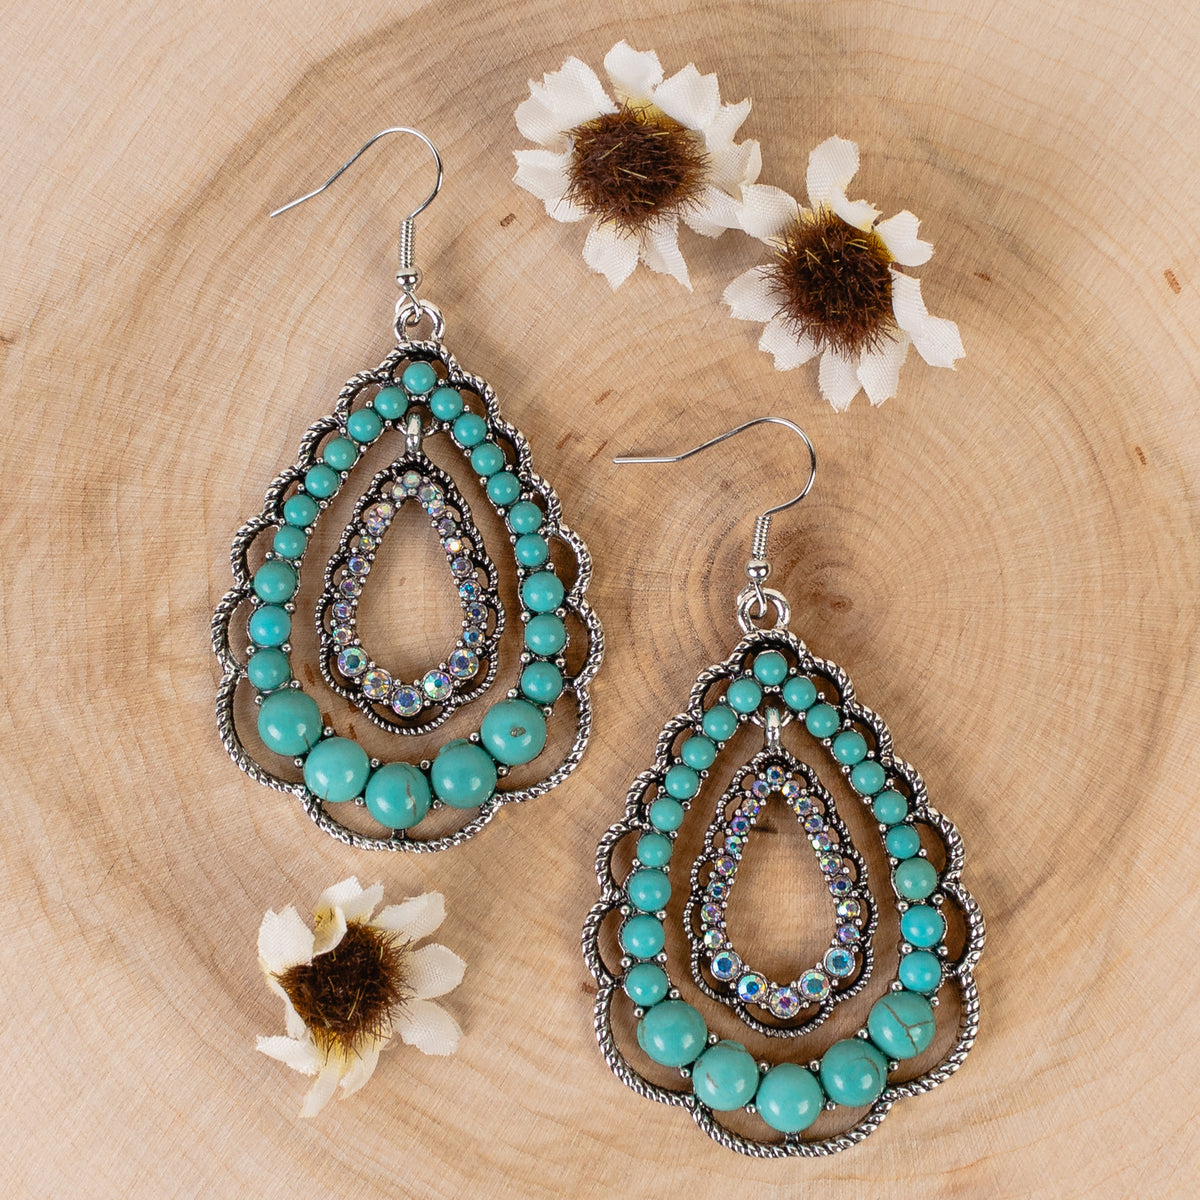 93235 - Crystal Squash Blossom Earrings - Turquoise & Silver